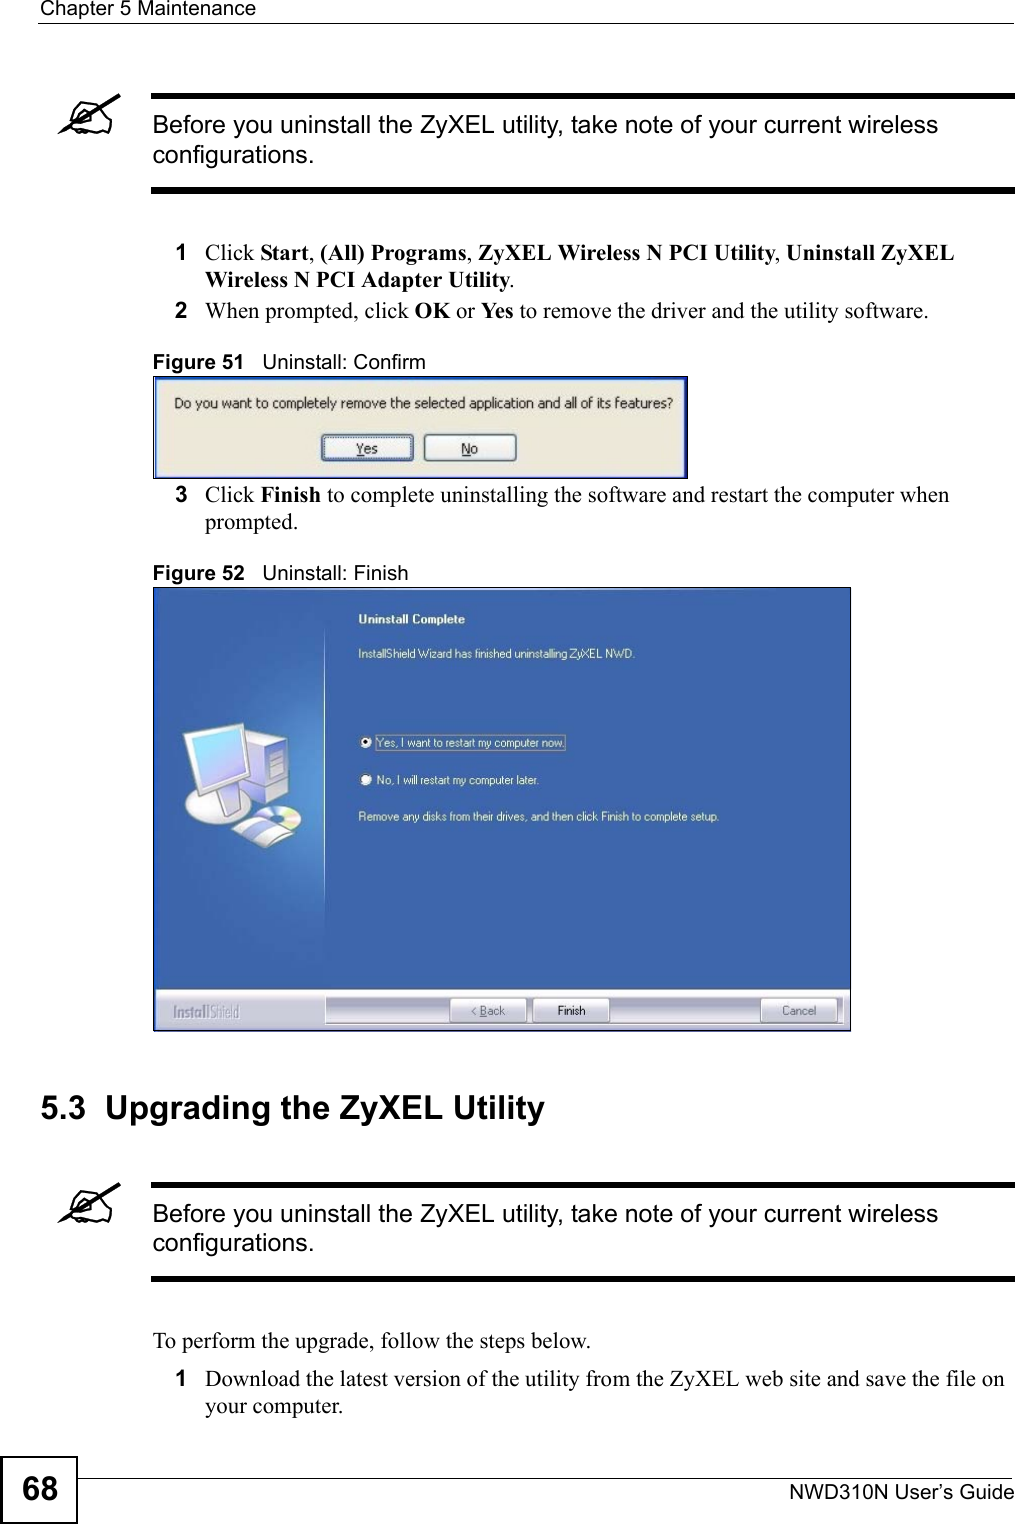 Chapter 5 MaintenanceNWD310N User’s Guide68&quot;Before you uninstall the ZyXEL utility, take note of your current wireless configurations.1Click Start, (All) Programs, ZyXEL Wireless N PCI Utility, Uninstall ZyXEL Wireless N PCI Adapter Utility.2When prompted, click OK or Ye s  to remove the driver and the utility software.Figure 51   Uninstall: Confirm  3Click Finish to complete uninstalling the software and restart the computer when prompted.Figure 52   Uninstall: Finish 5.3  Upgrading the ZyXEL Utility&quot;Before you uninstall the ZyXEL utility, take note of your current wireless configurations.To perform the upgrade, follow the steps below.1Download the latest version of the utility from the ZyXEL web site and save the file on your computer.